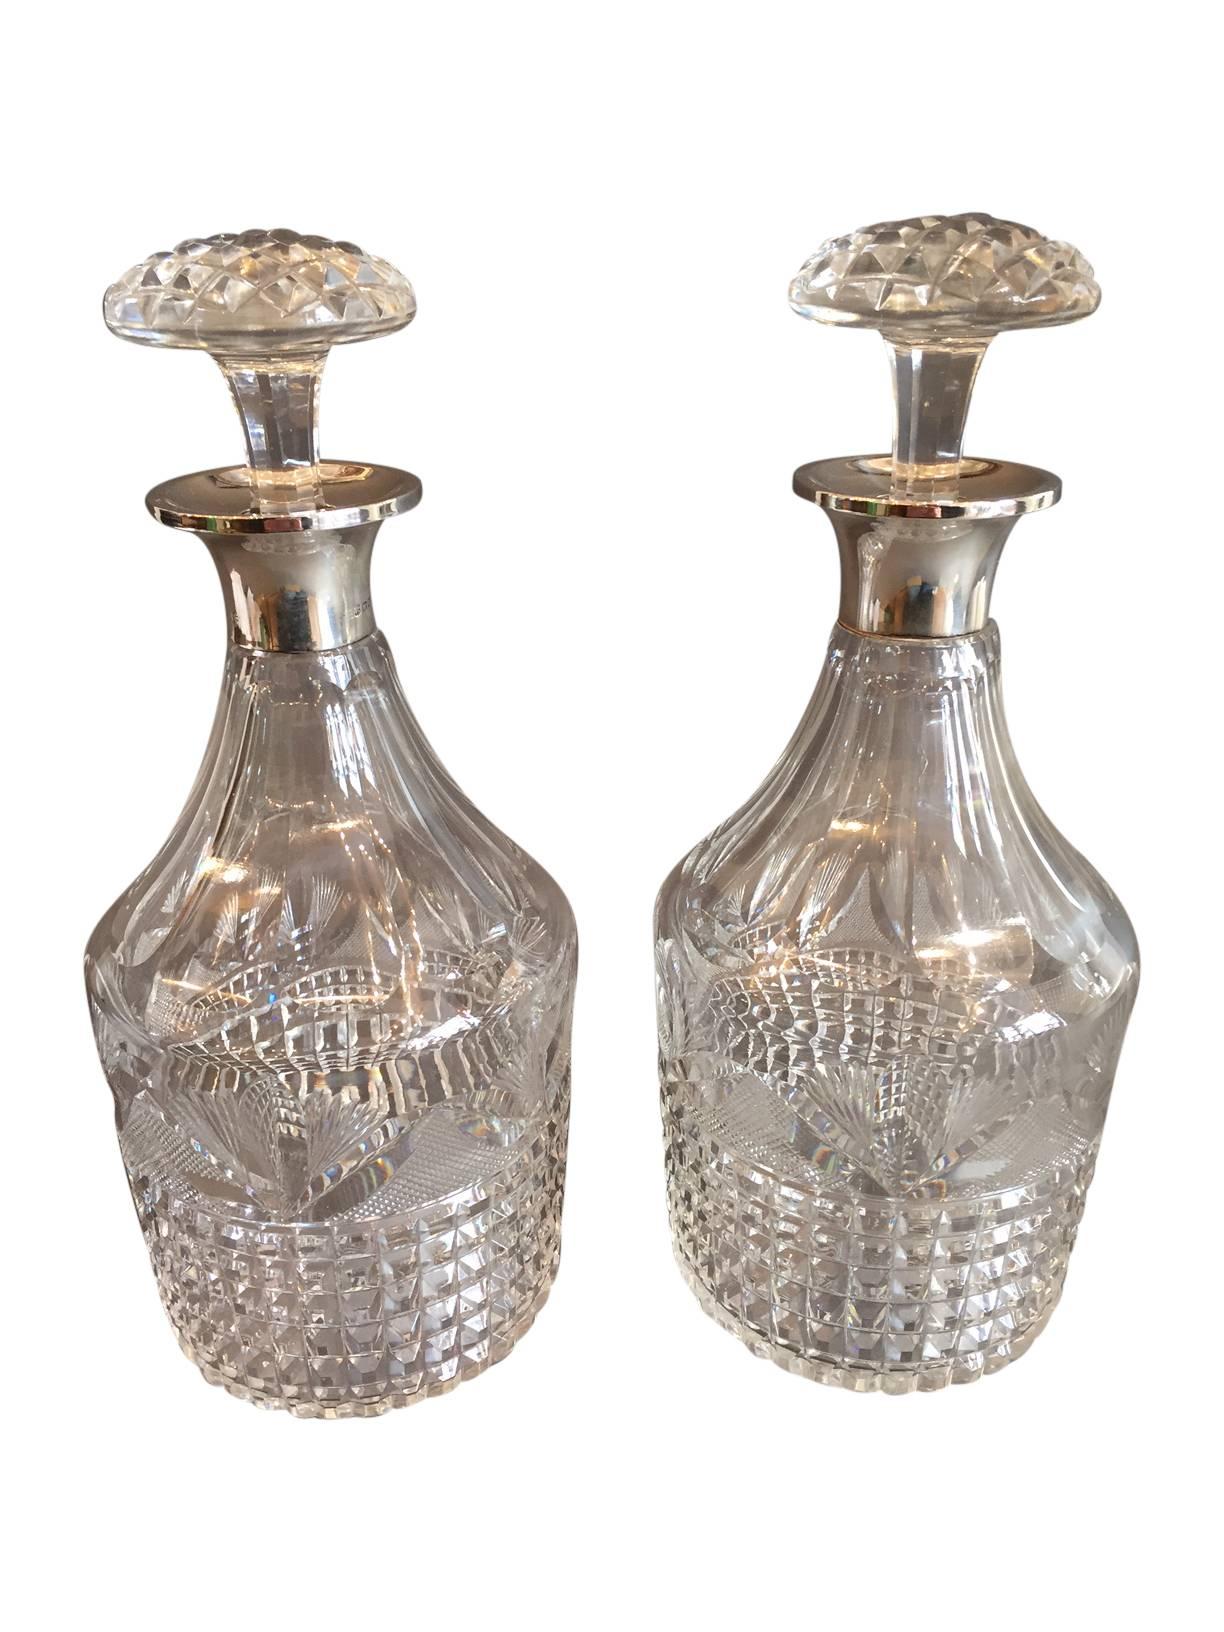 A beautiful pair of English sterling silver round-neck decanters, circa 1926.